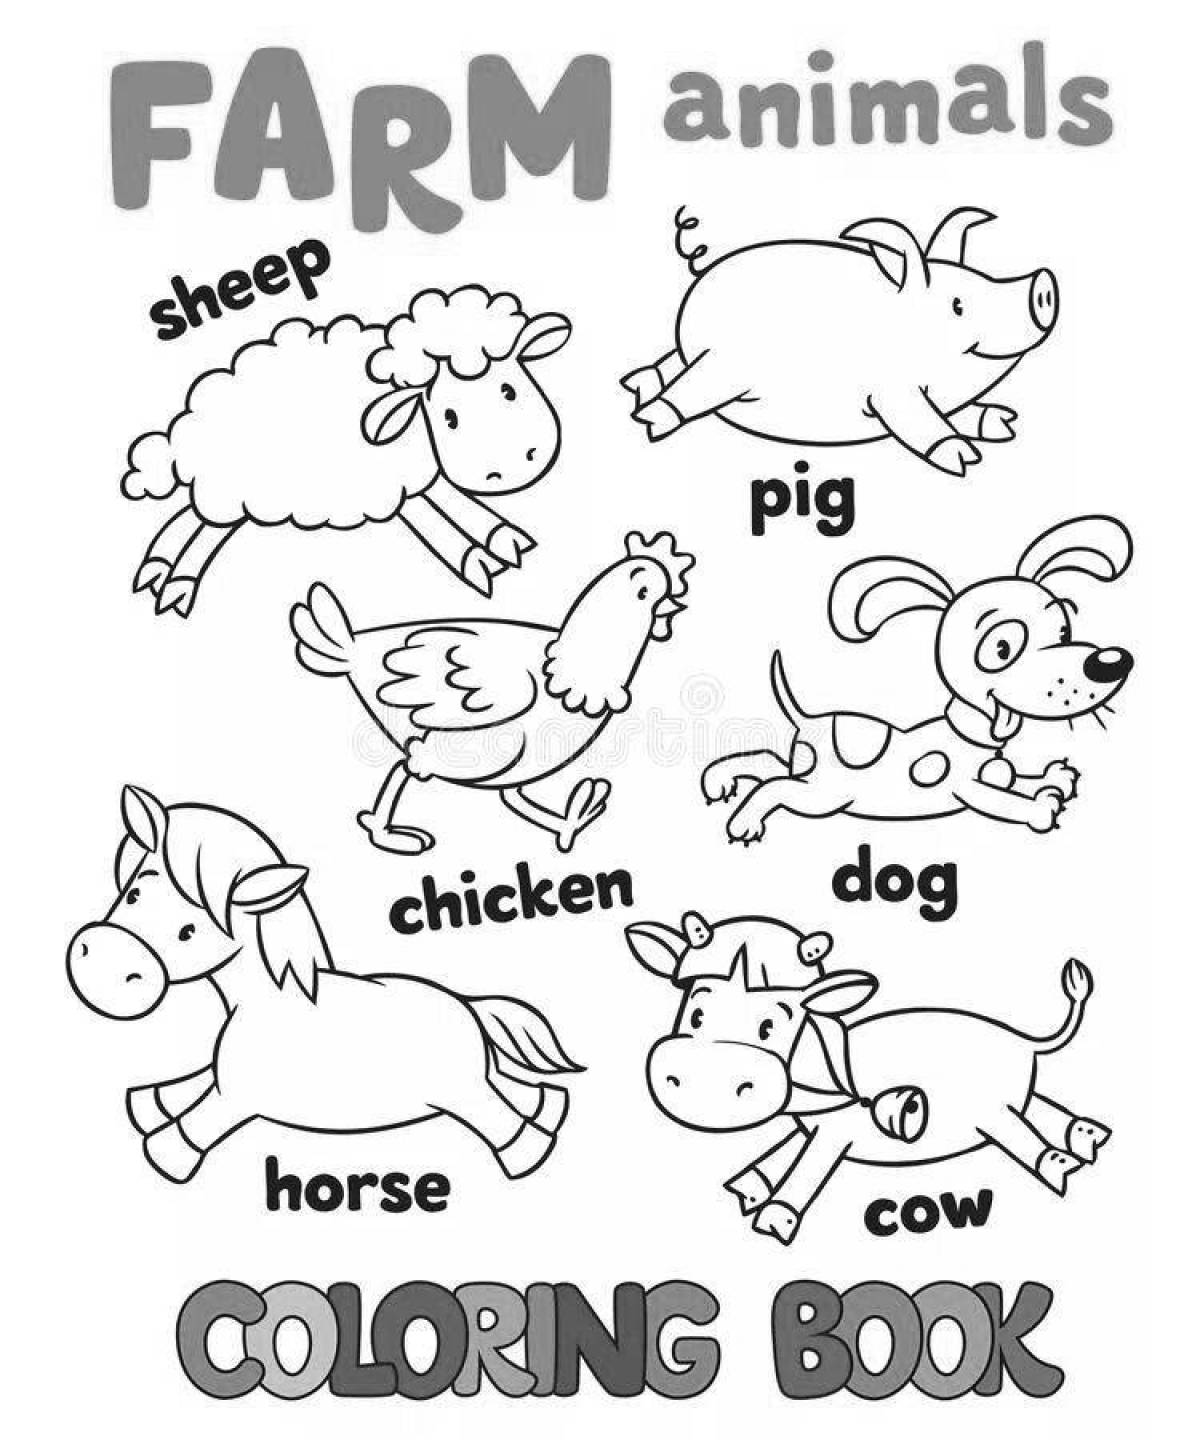 Funny Animal Coloring Pages in English